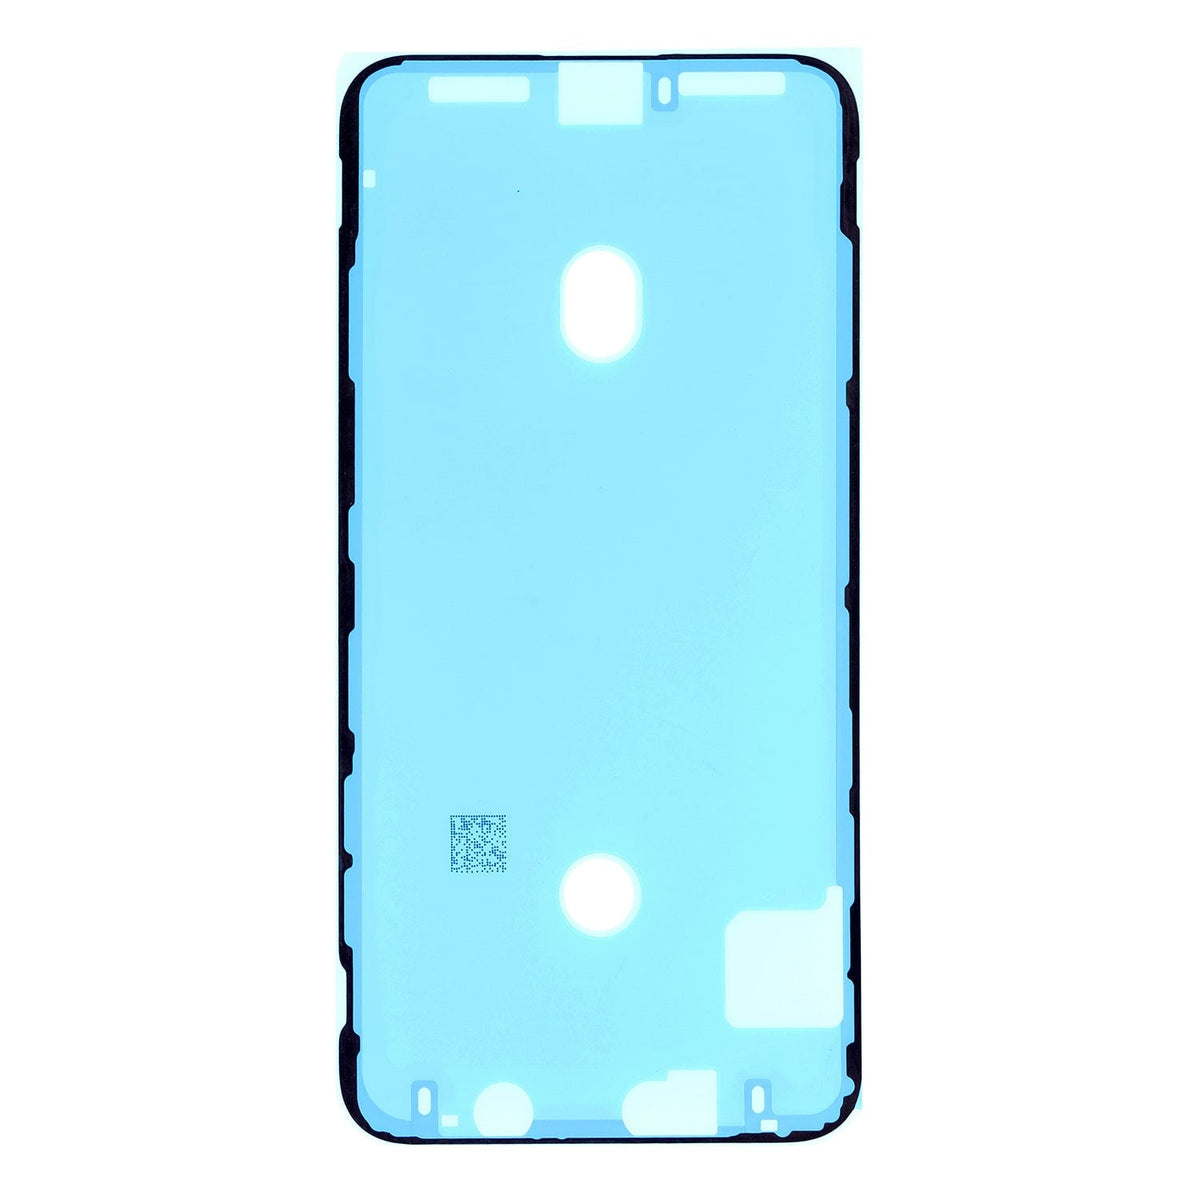 DIGITIZER FRAME ADHESIVE FOR IPHONE XS MAX